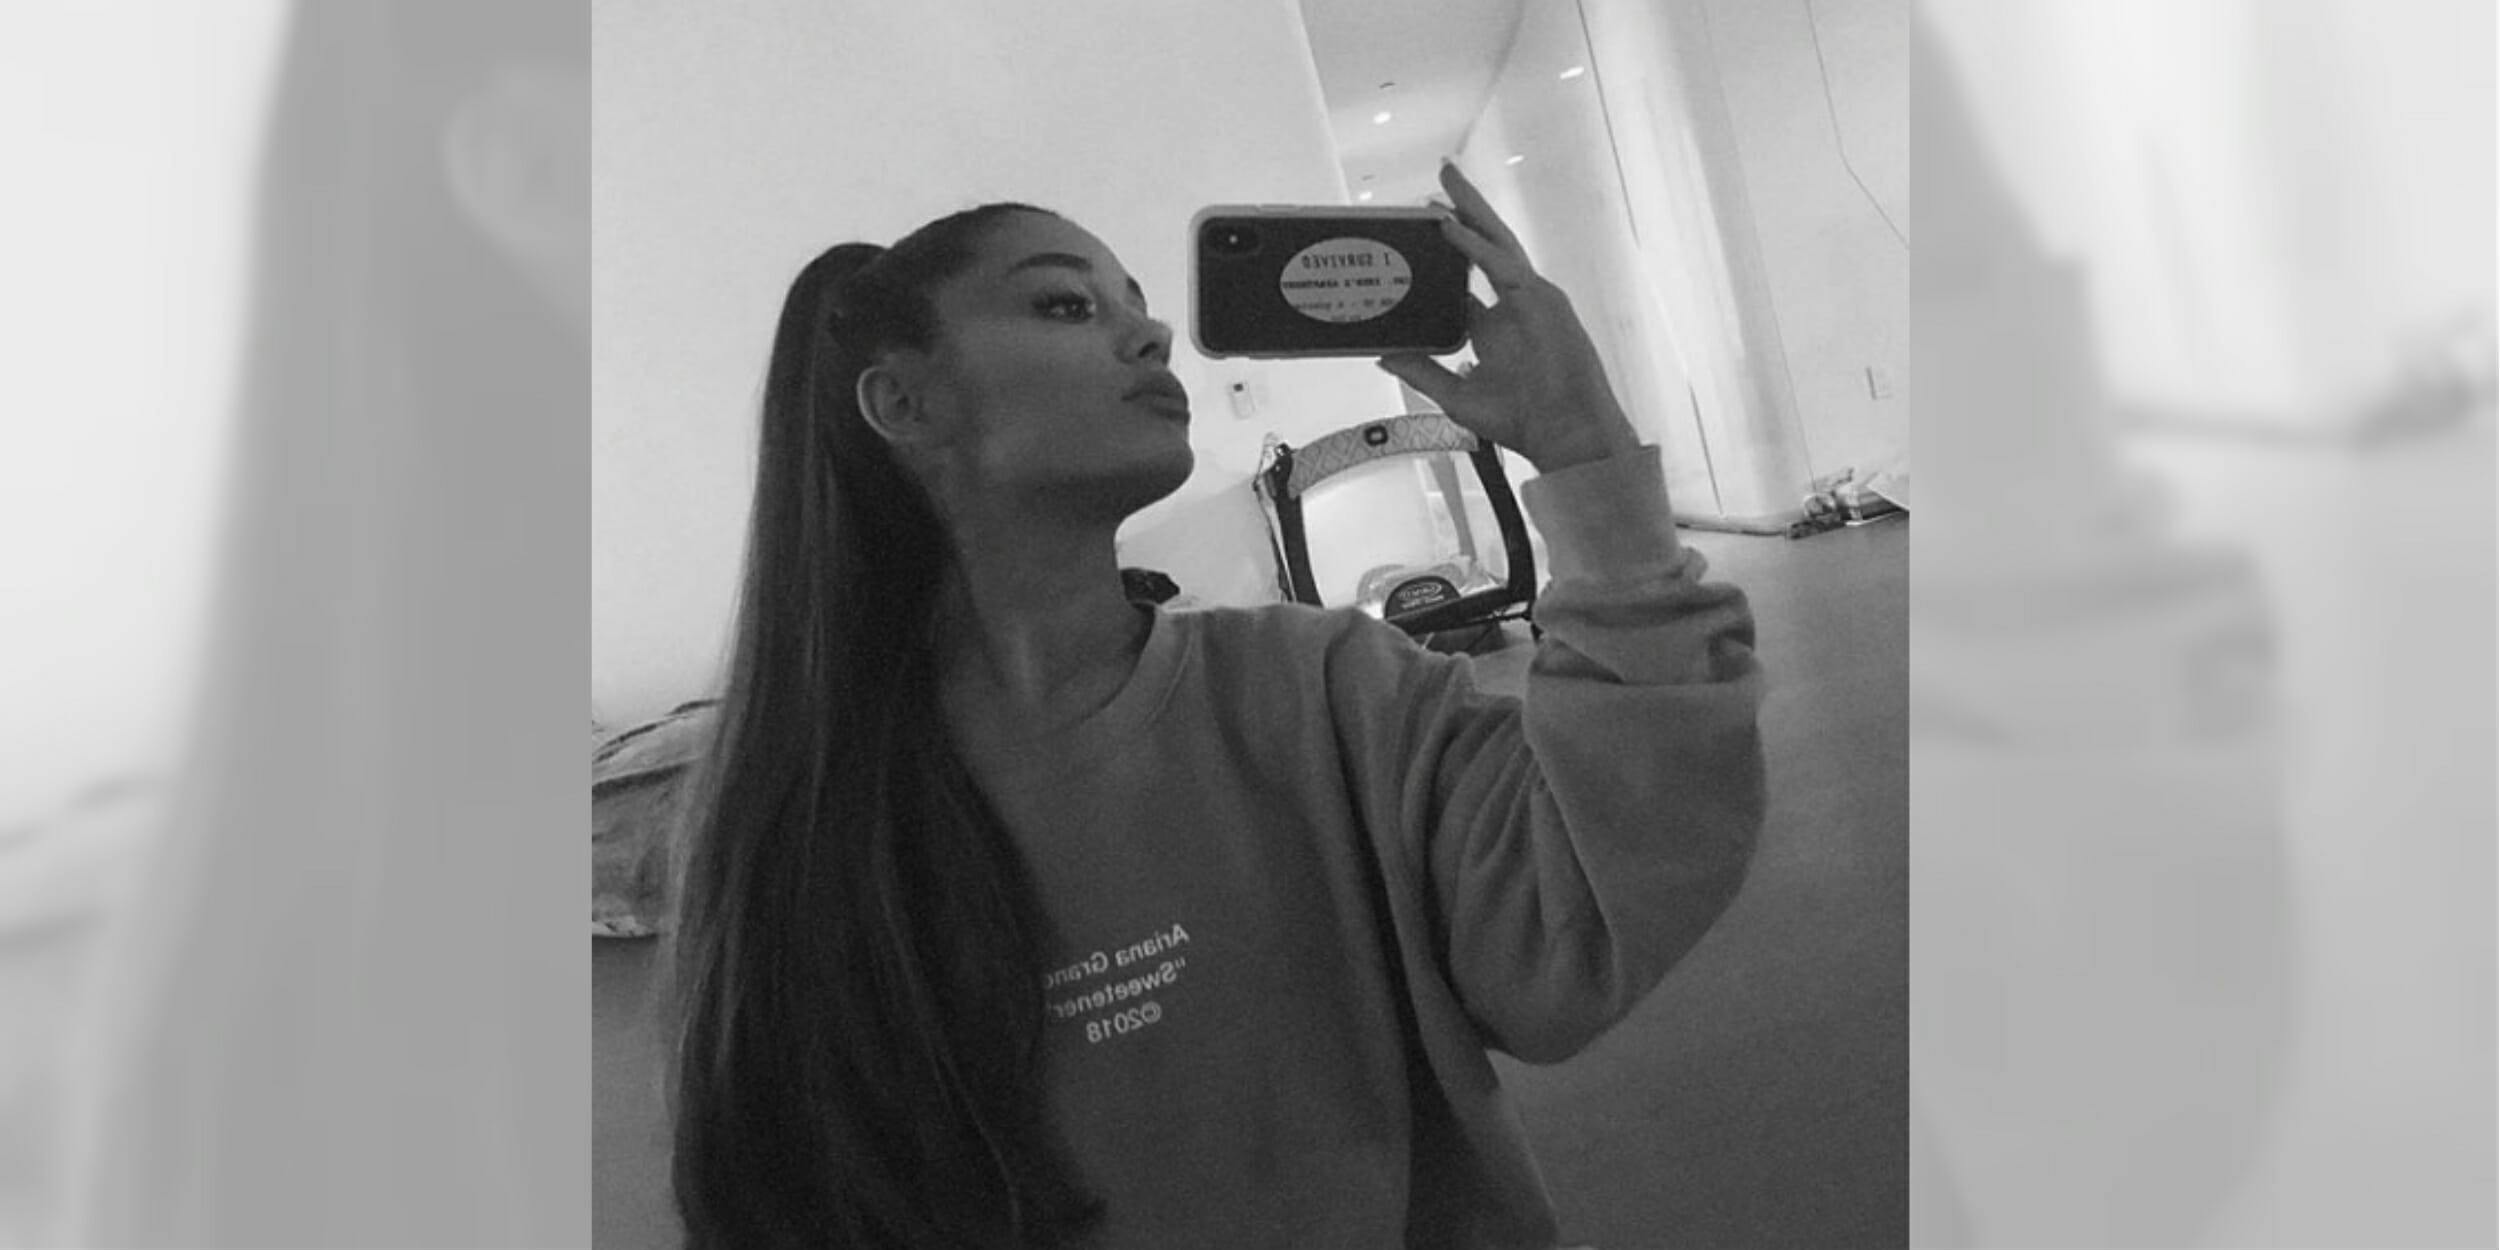 Ariana Grande’s Instagram post about d*ck pics proves she’s a meme queen